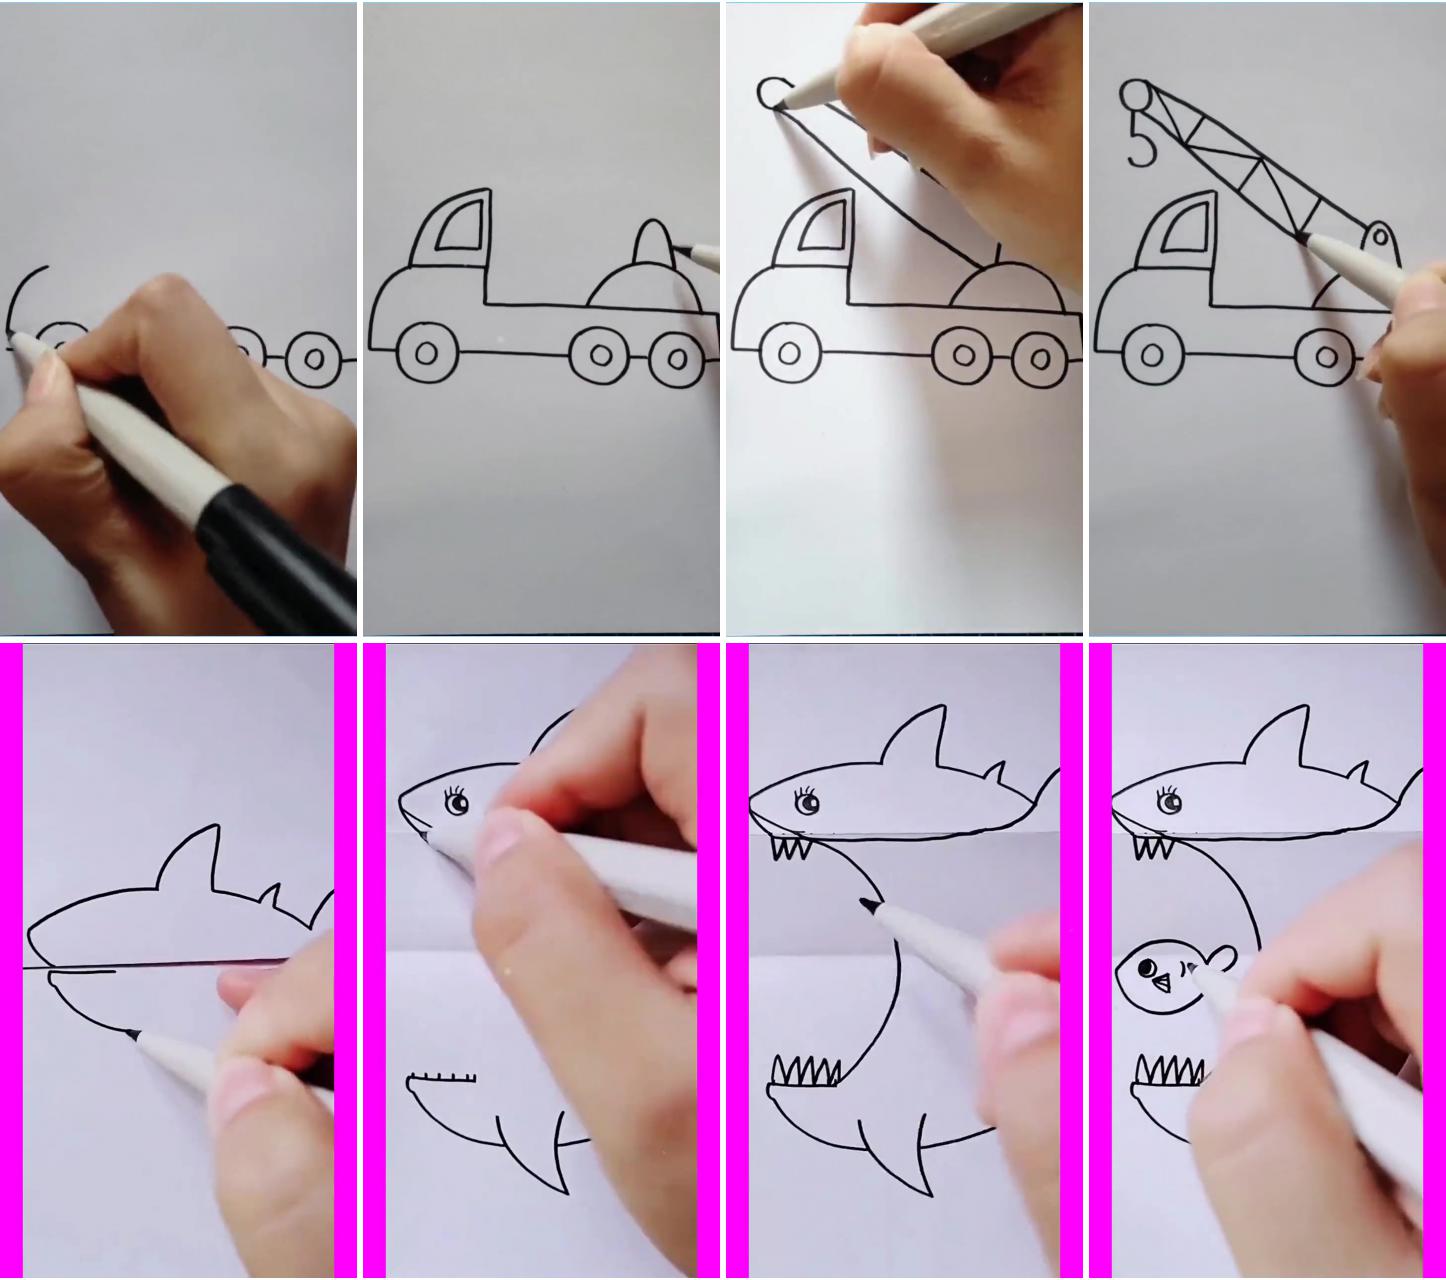 How to draw a cranes: a beginning artist's guide | learn how to draw shark with easy lessons